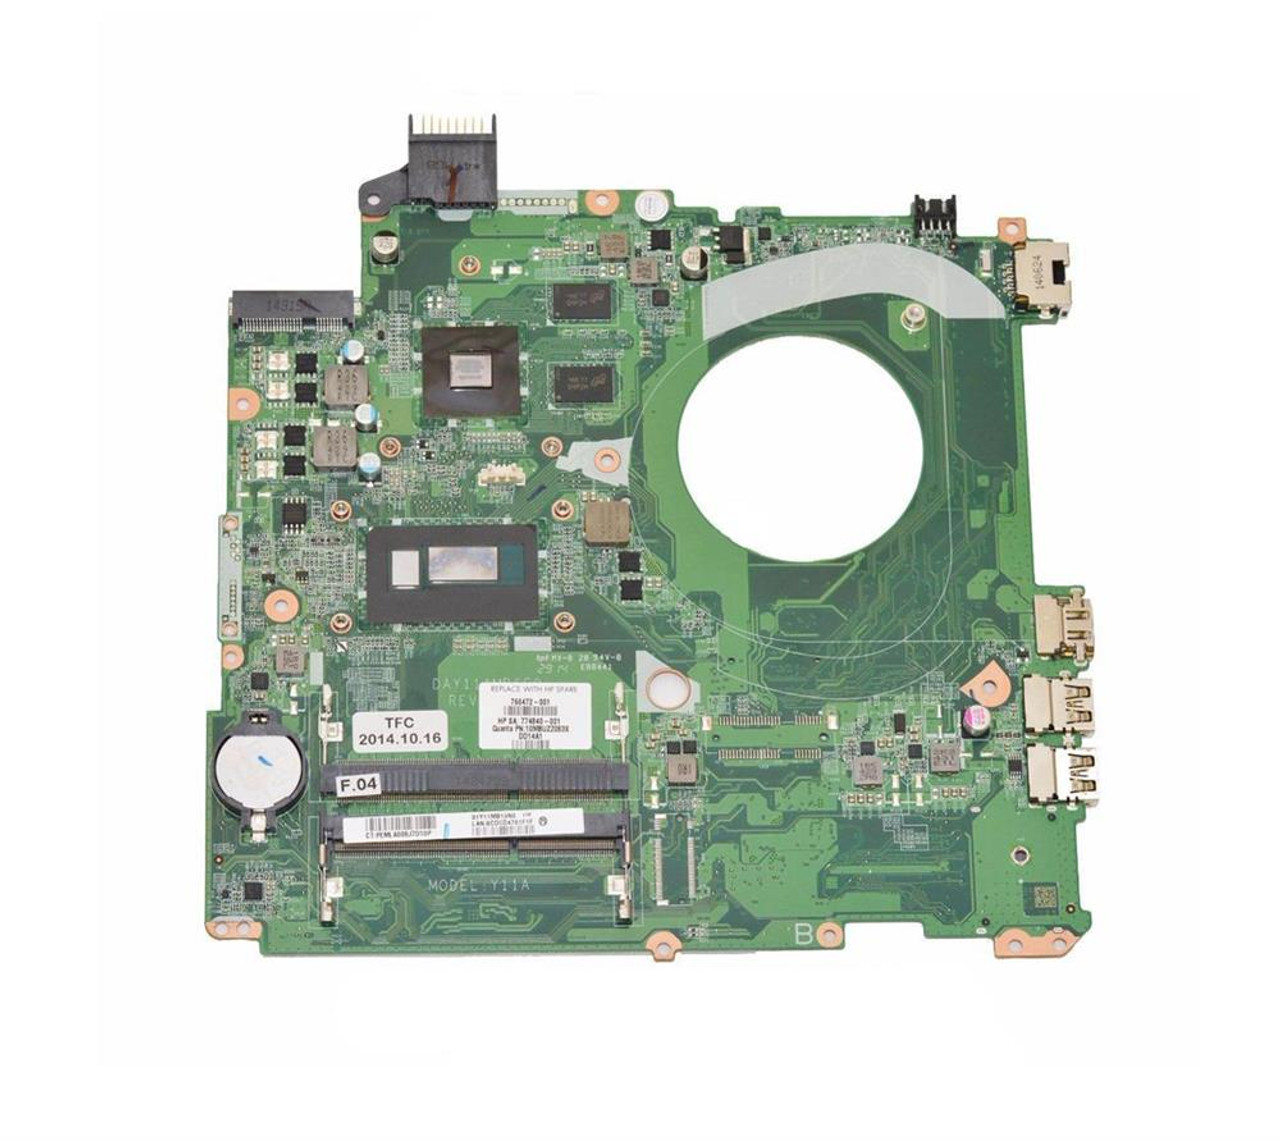 794987-501 HP System Board (Motherboard) With 2.40GHz Intel Core i7-5500u Processor for Envy 15-k2 (Refurbished)